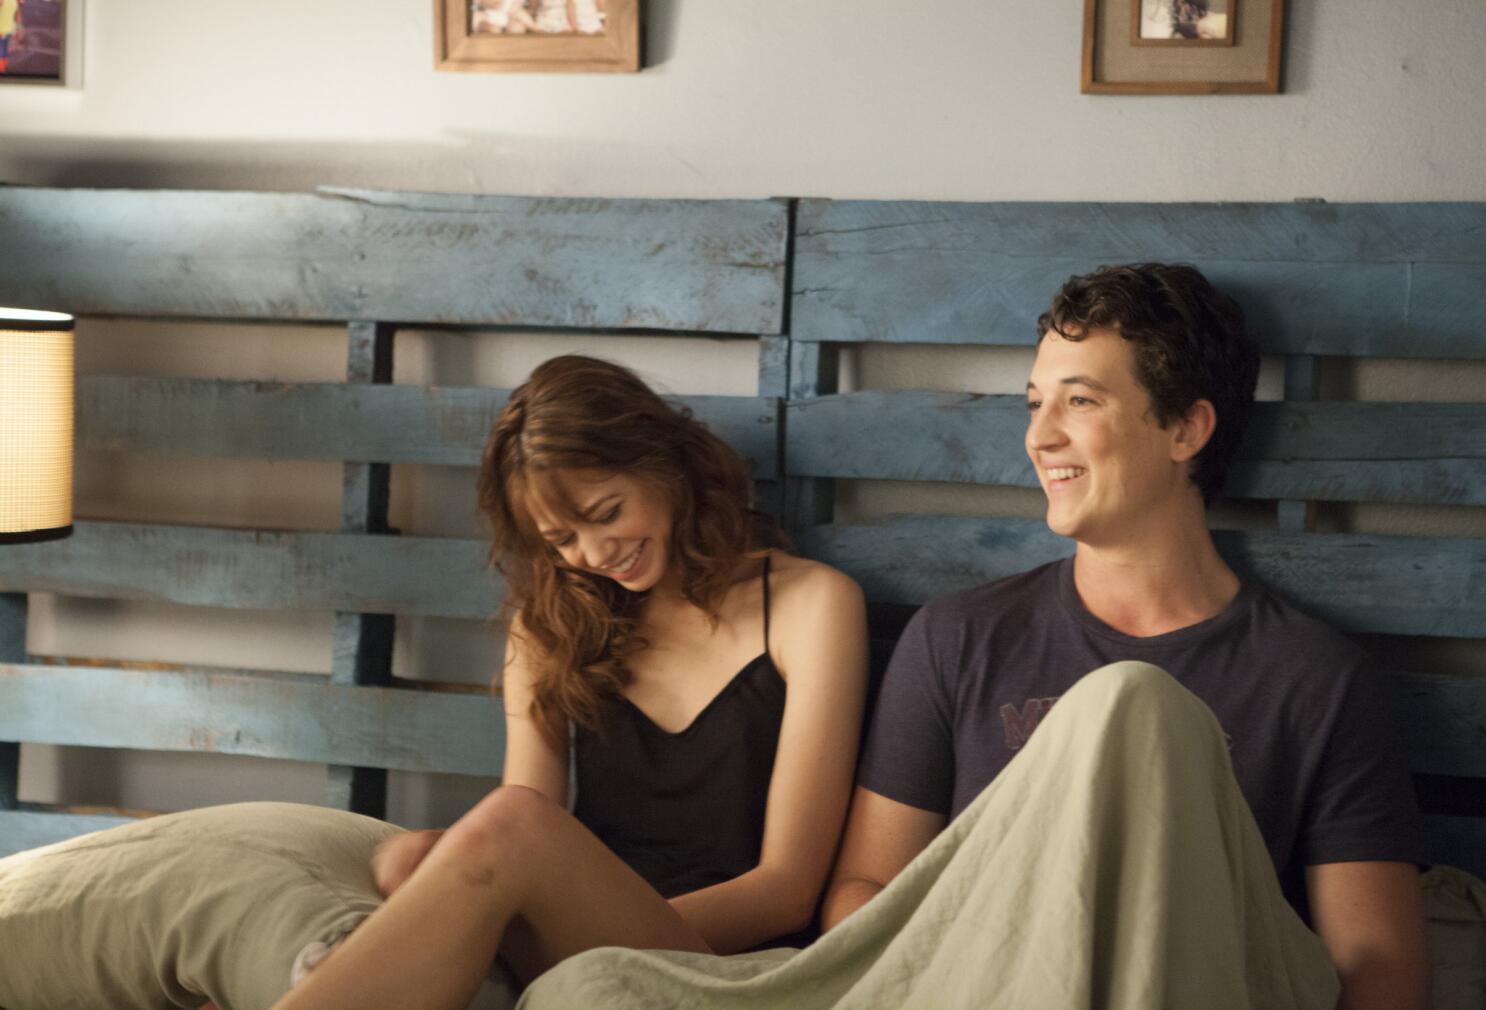 Two Night Stand: A funny, flirty romcom See more